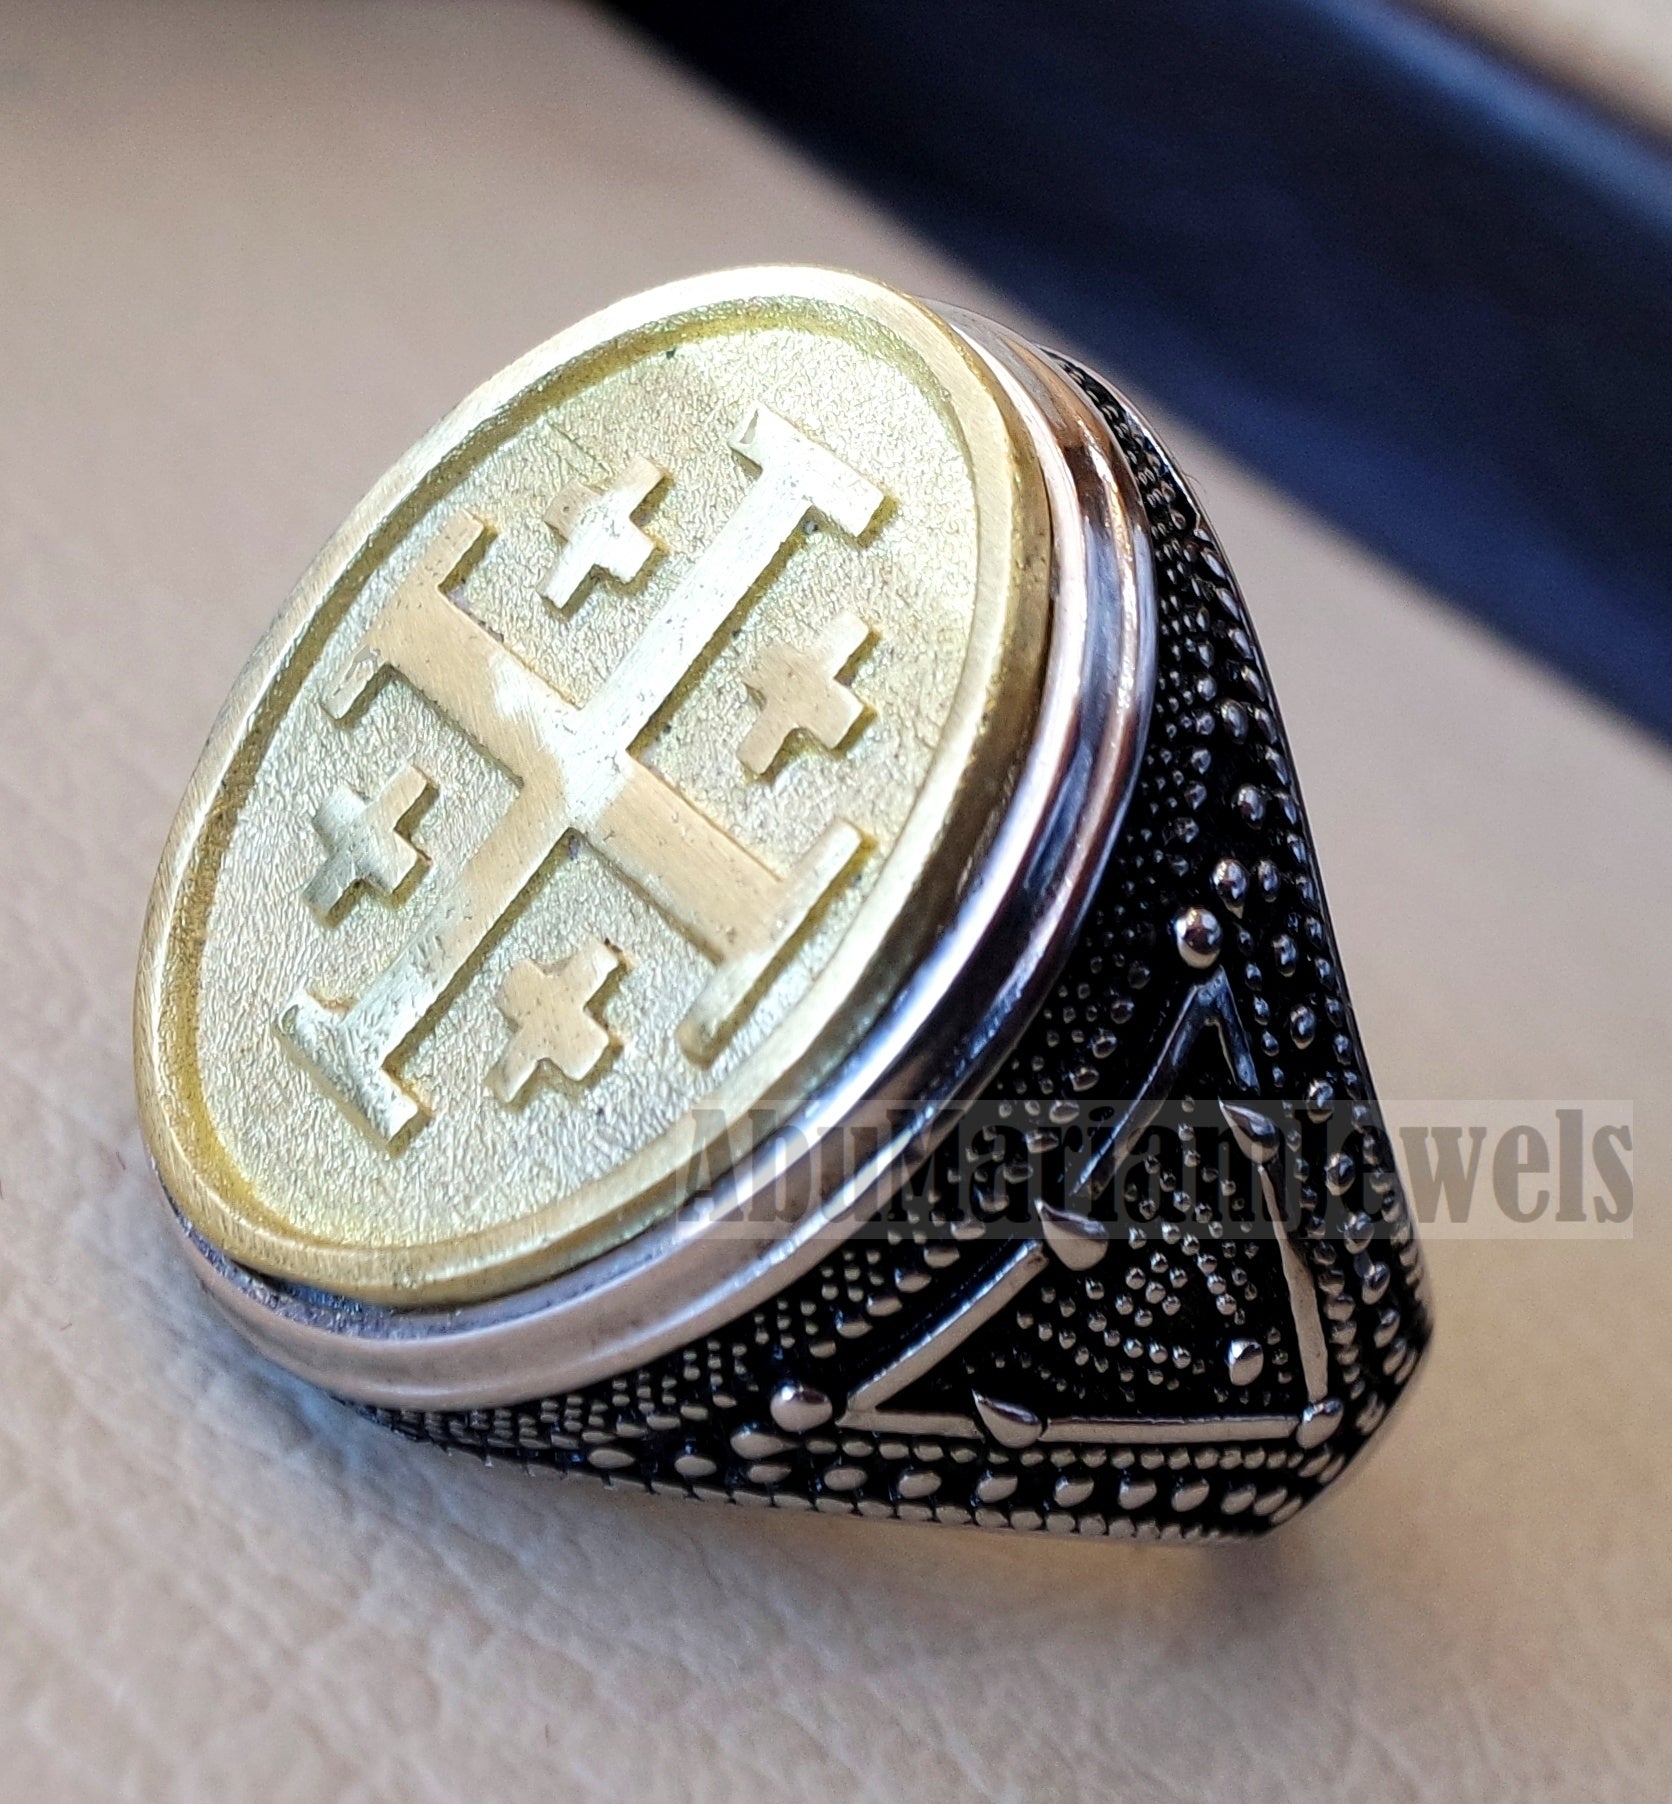 Jerusalem Cross ring christ christian symbol sterling silver 925 and bronze man gift jewelry oval vintage style all sizes Catholic Orthodox